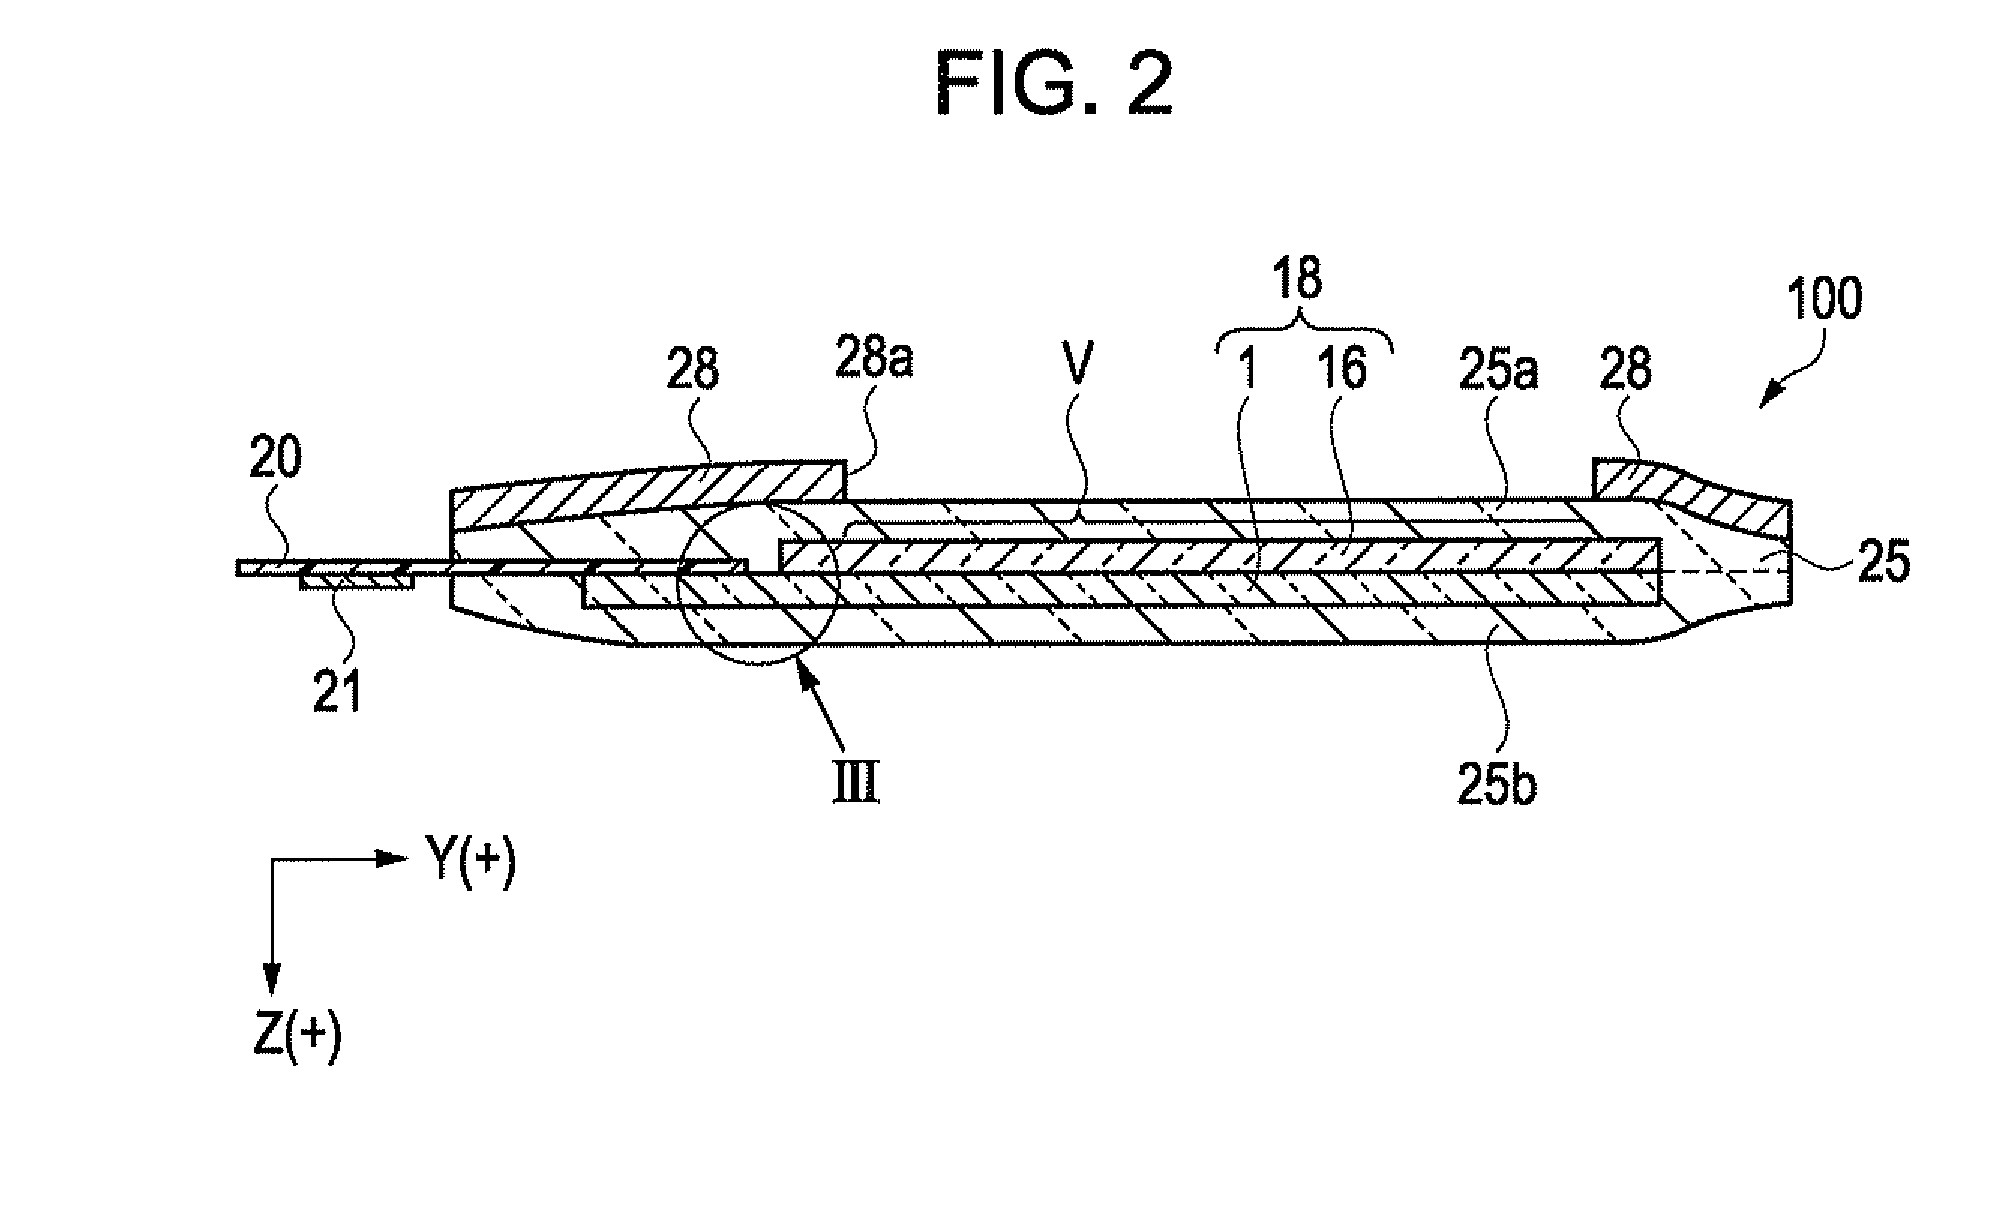 Electro-optical device, electronic device, and illumination apparatus including a panel having an electro-optical layer